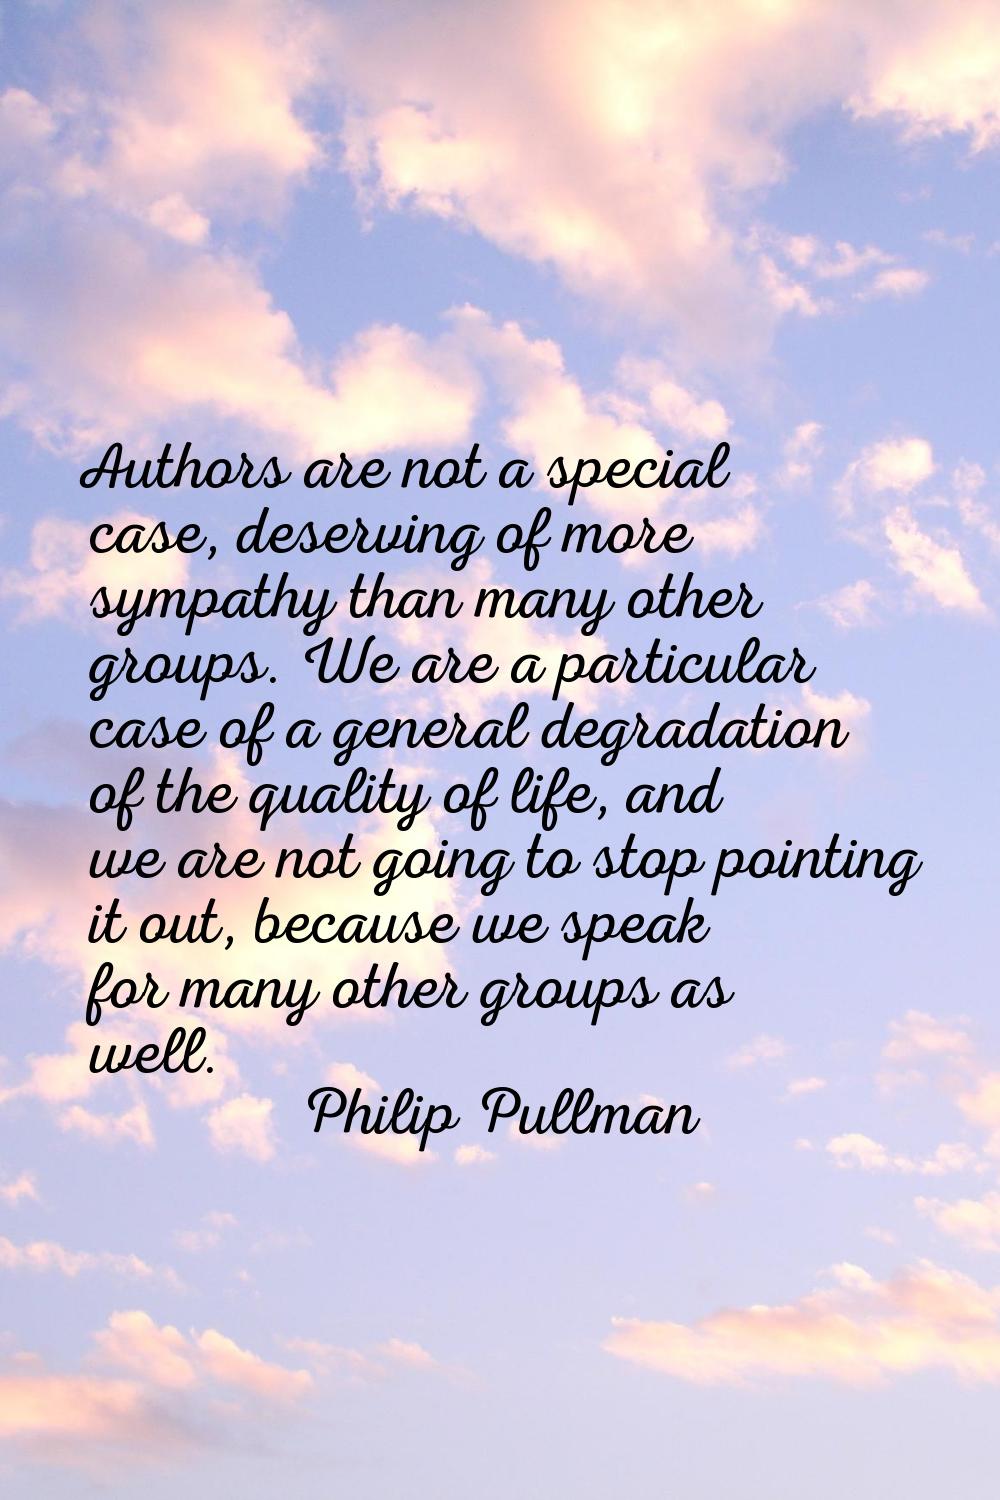 Authors are not a special case, deserving of more sympathy than many other groups. We are a particu